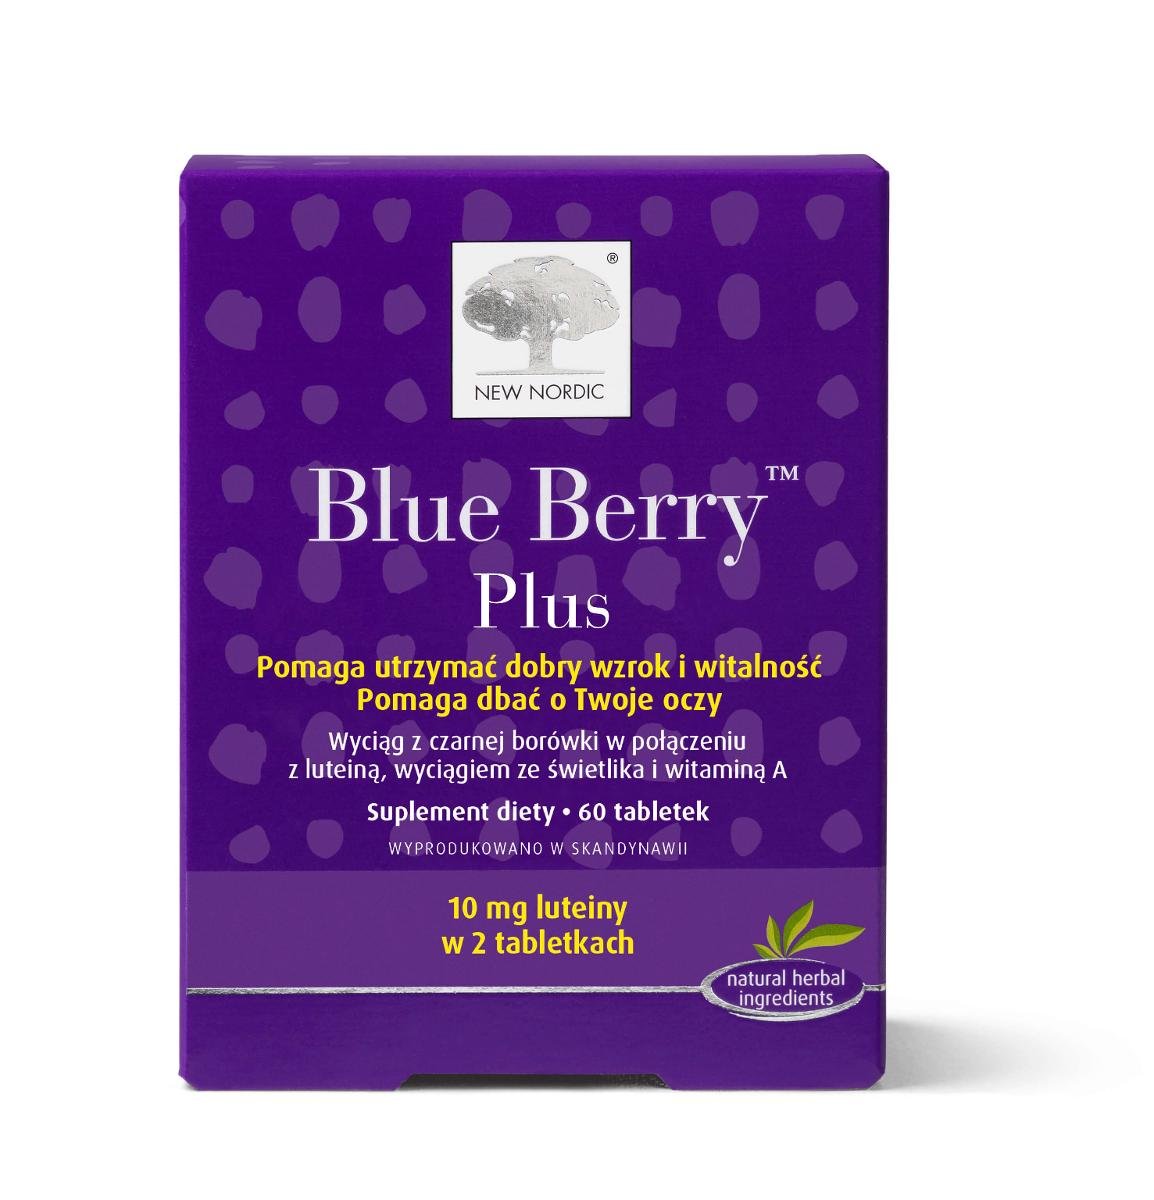 New Nordic BLUE BERRY 60 tabl 3343651